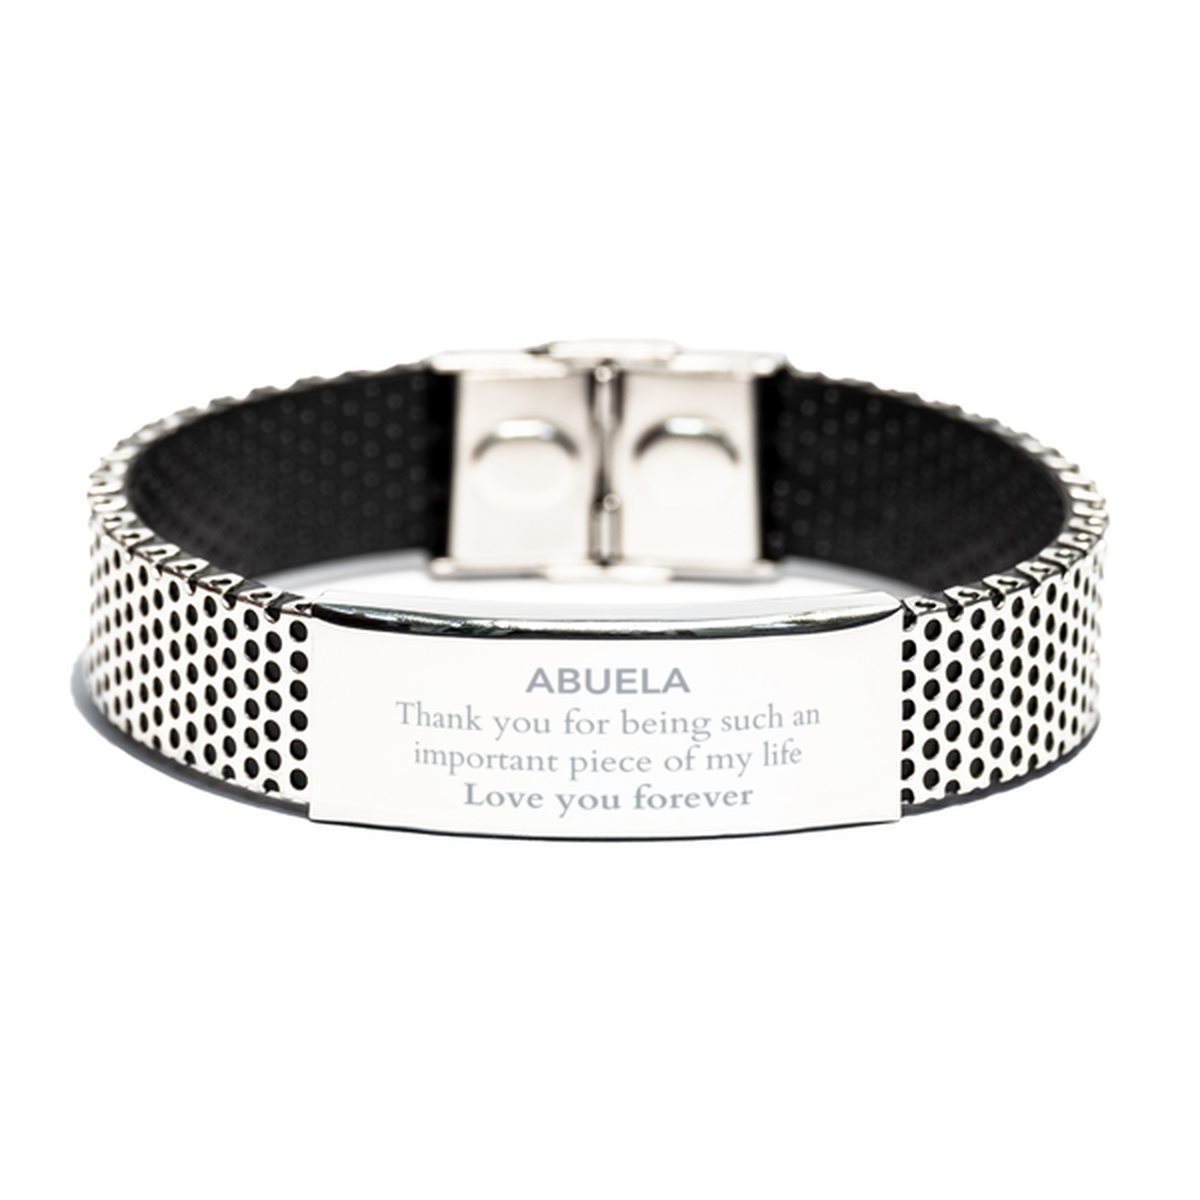 Appropriate Abuela Stainless Steel Bracelet Epic Birthday Gifts for Abuela Thank you for being such an important piece of my life Abuela Christmas Mothers Fathers Day